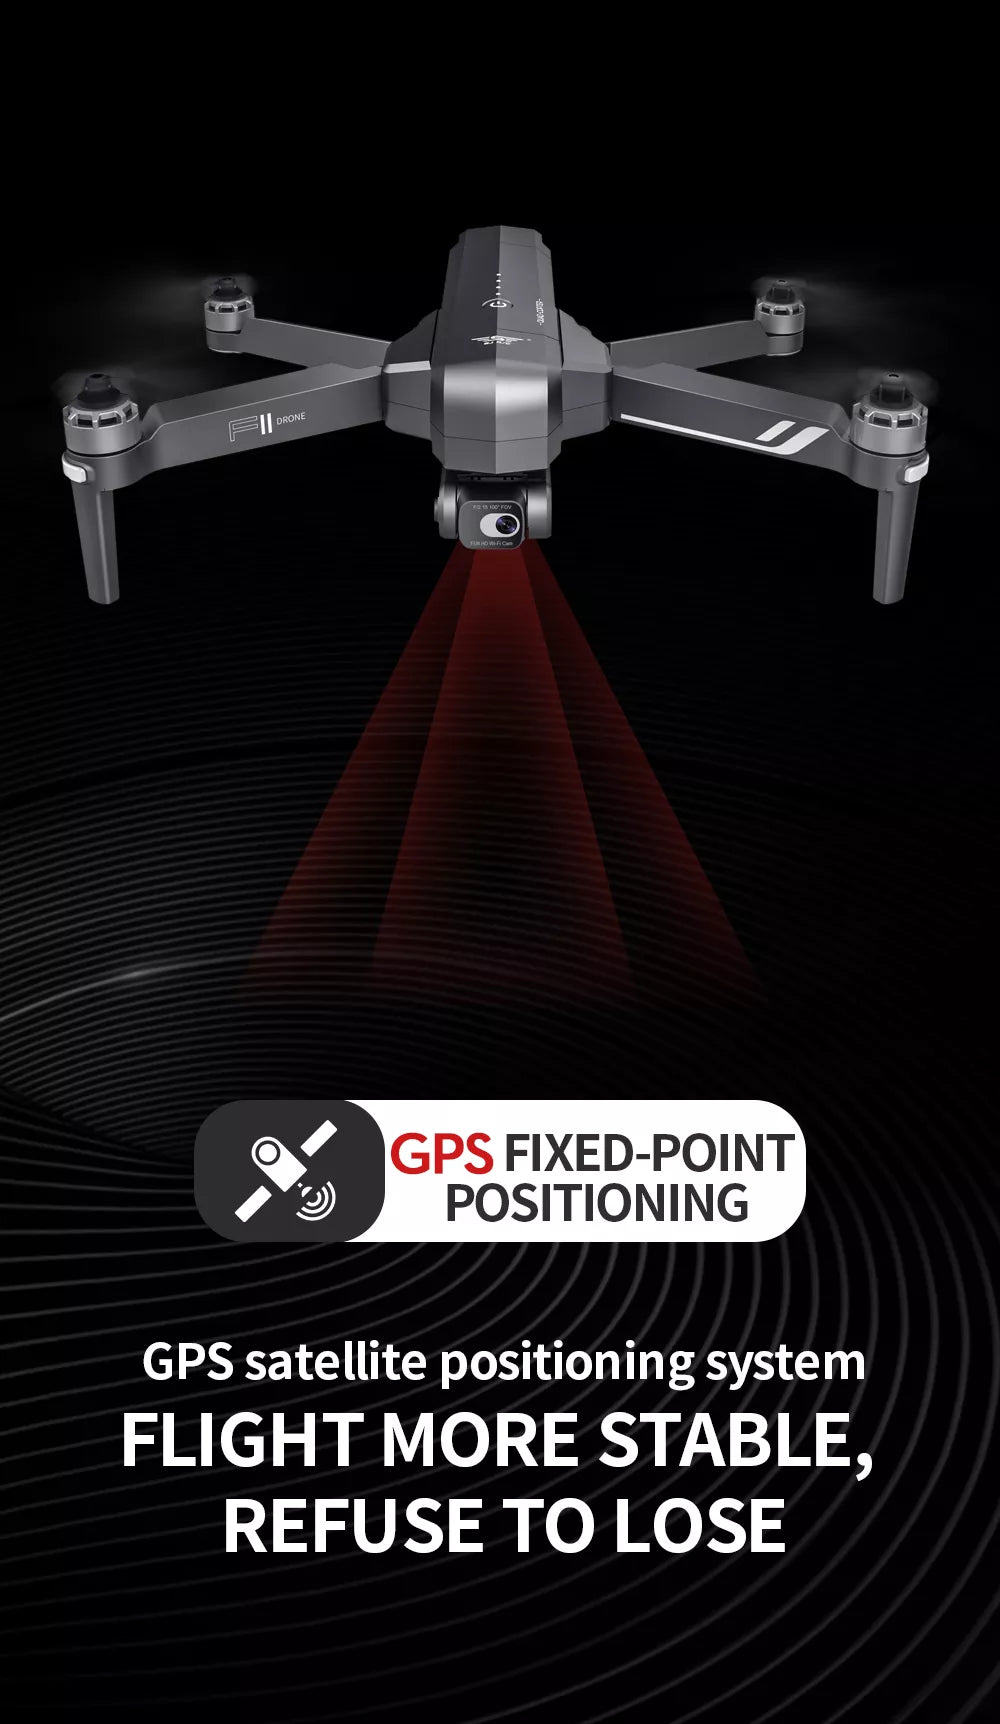 SJRC F11S 4K HD PRO Drone, GPS FIXED-POINT POSITIONING GPS satellite positioning system FLIGHT